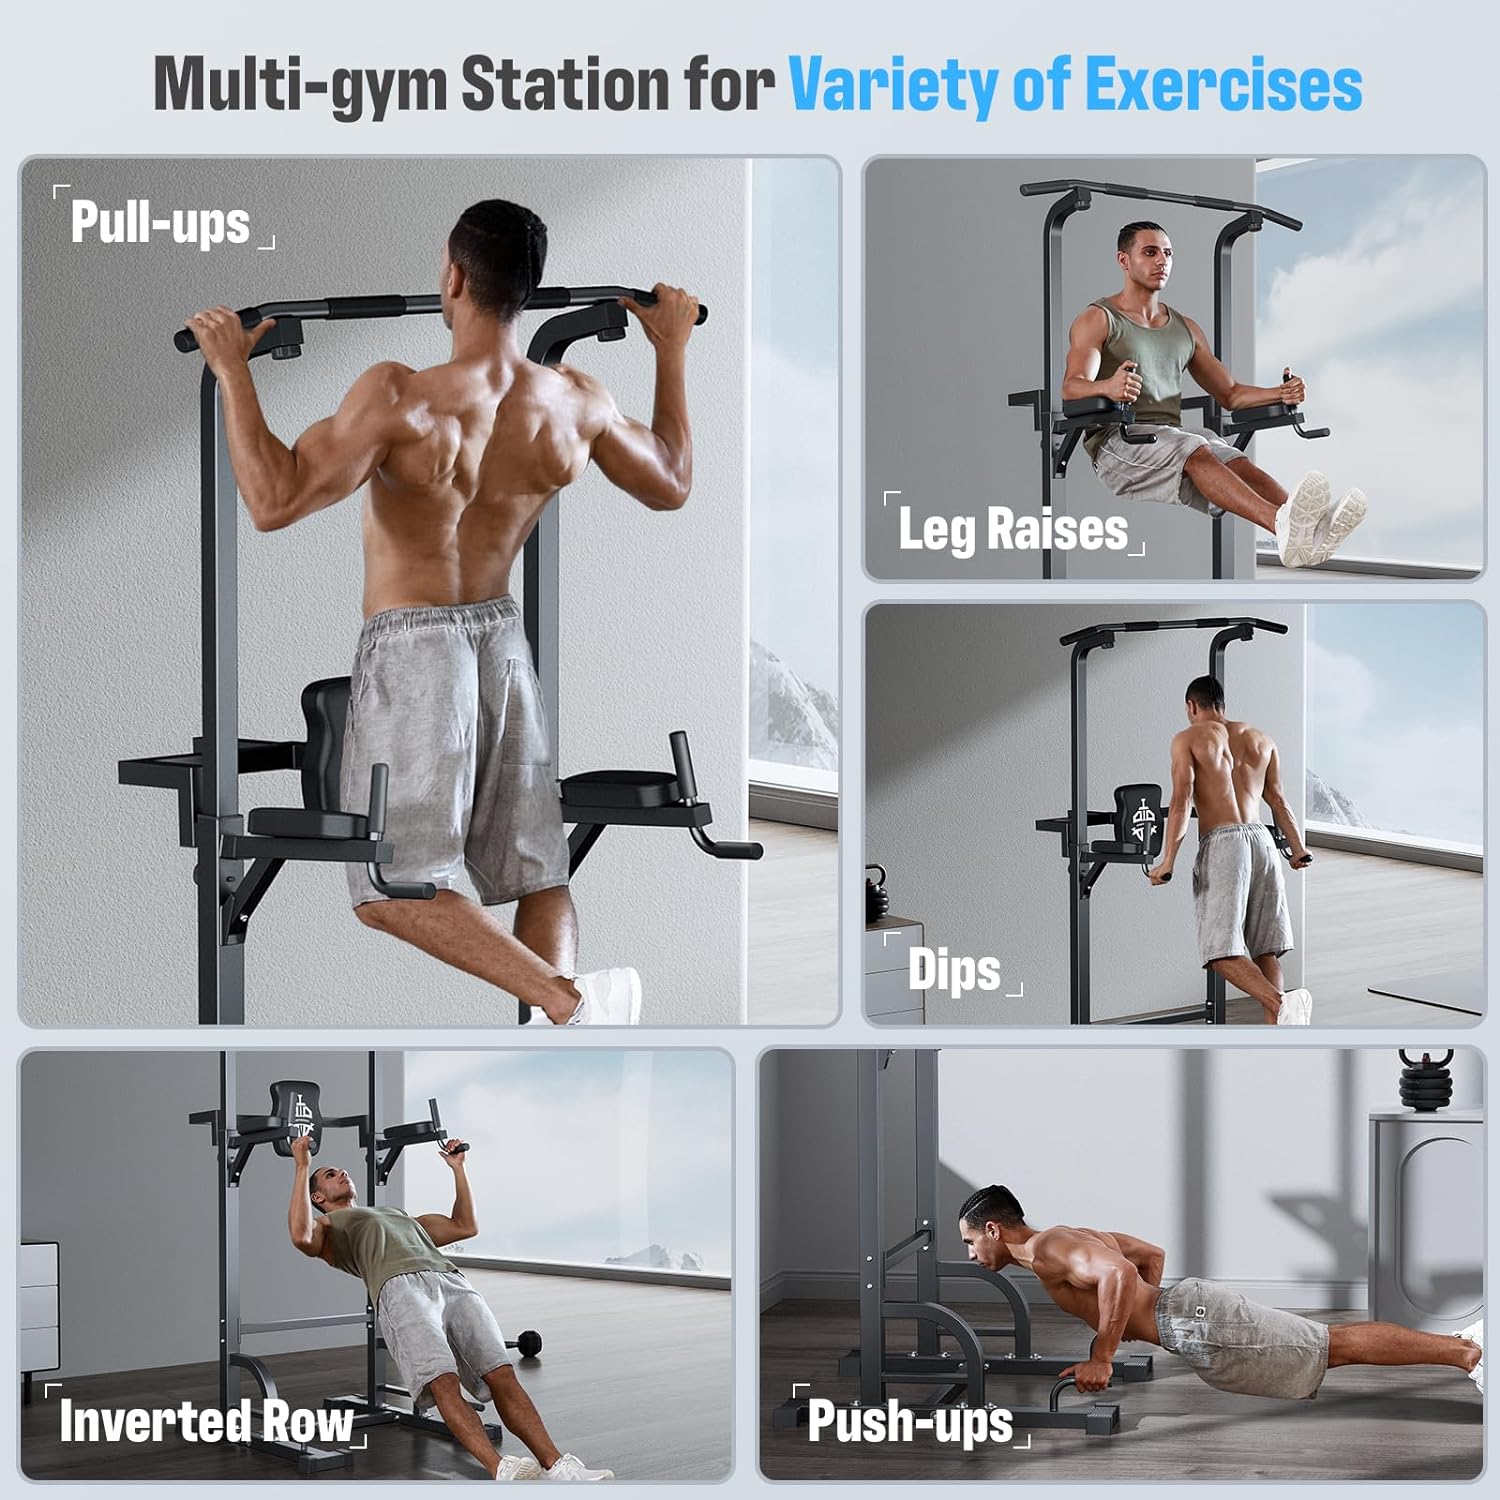 Sportsroyals Power Tower Pull Up Dip Station Assistive Trainer Multi-Function - $110